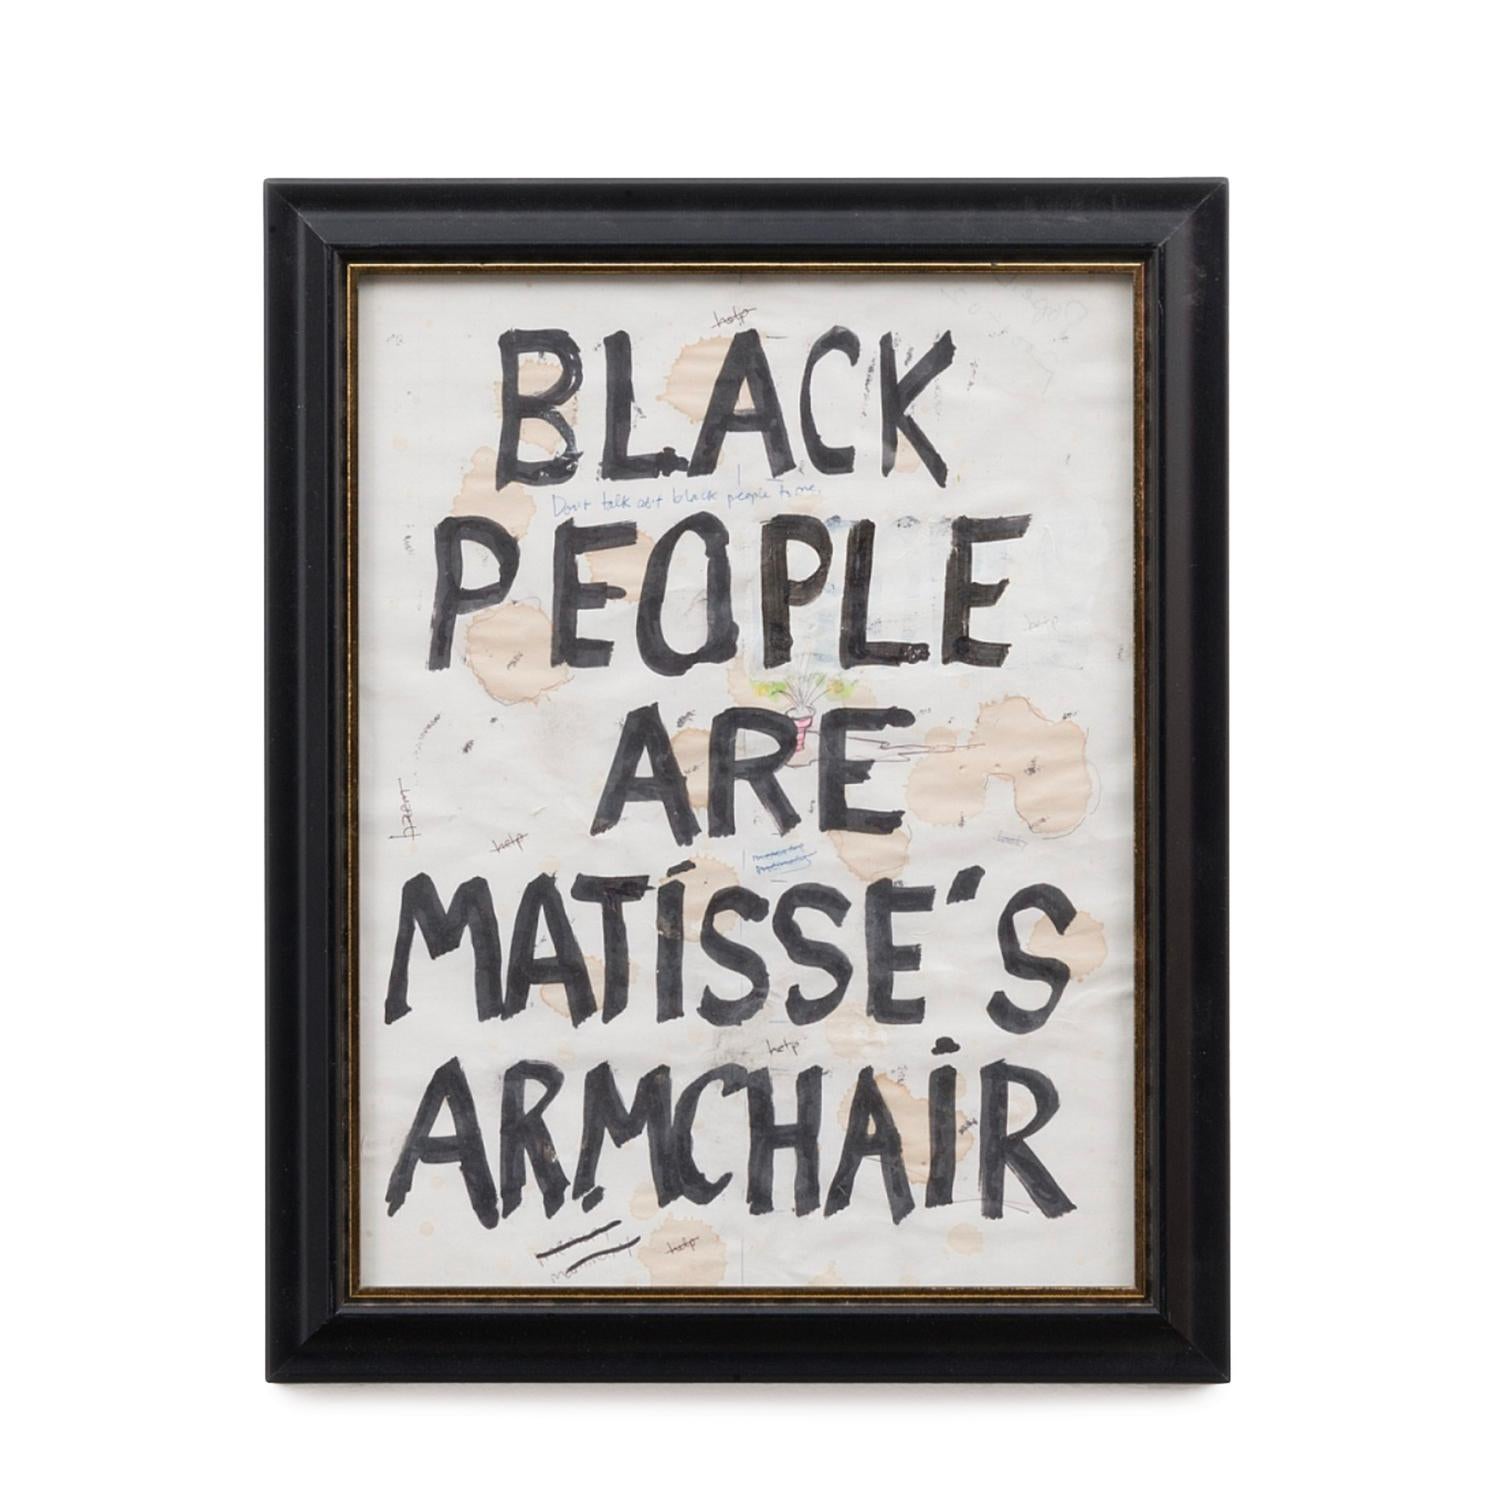 Black People Are Matisse's Chair (INV# NP3710)
Pope.L
mixed media on paper
12.5 x 10 x .5"
2001